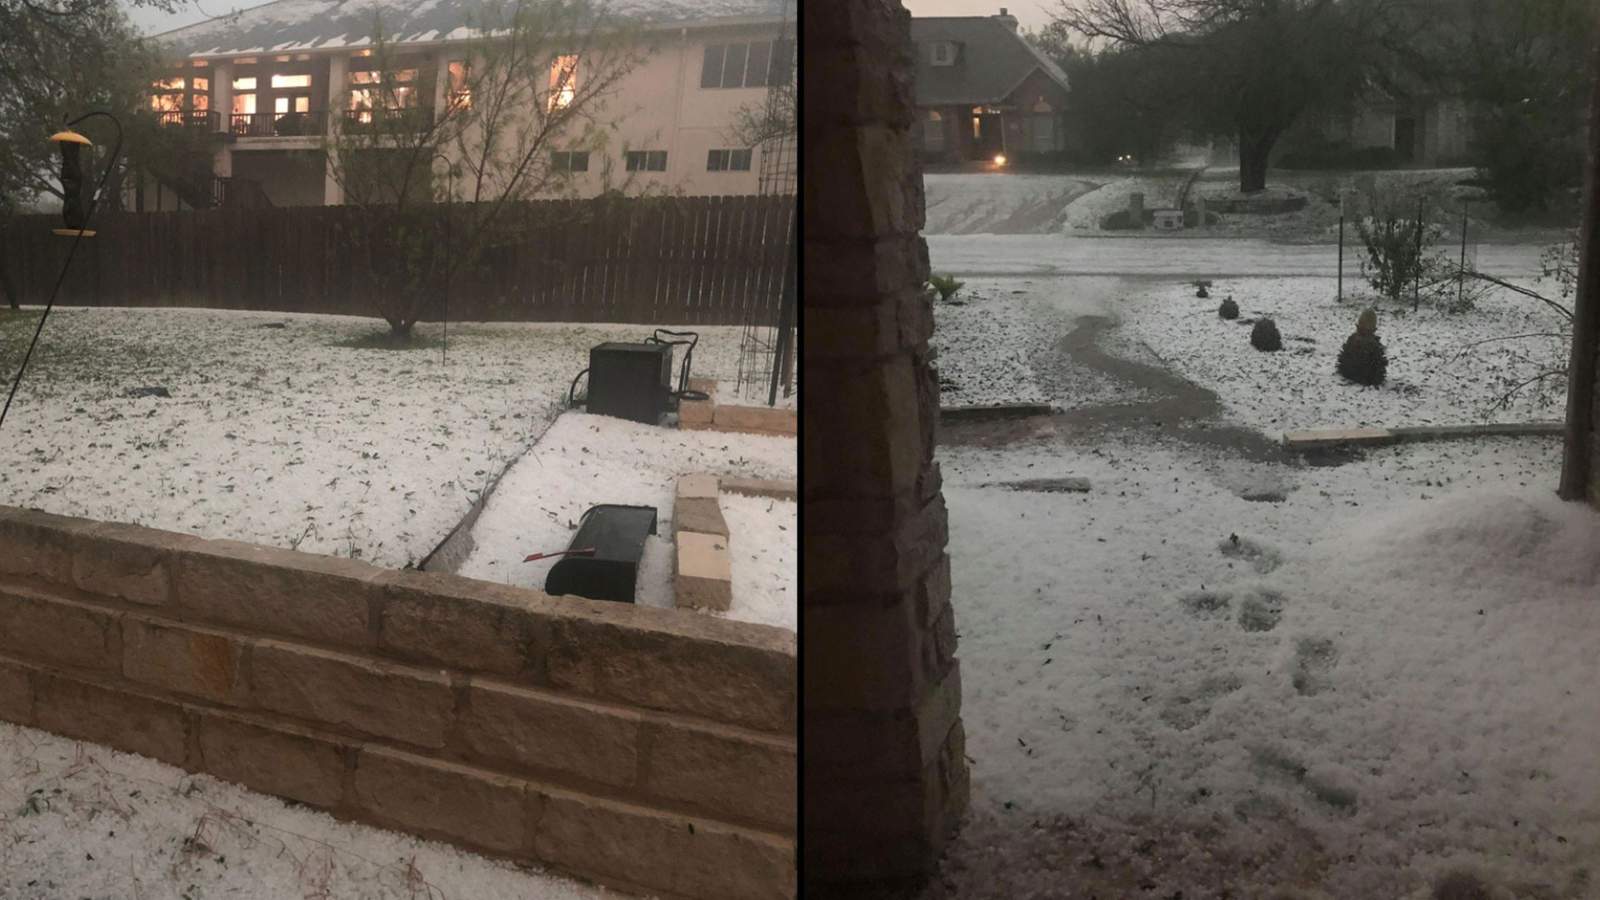 ‘Looks like snow:’ Twitter users share videos of hail storm in San Antonio and Kerrville